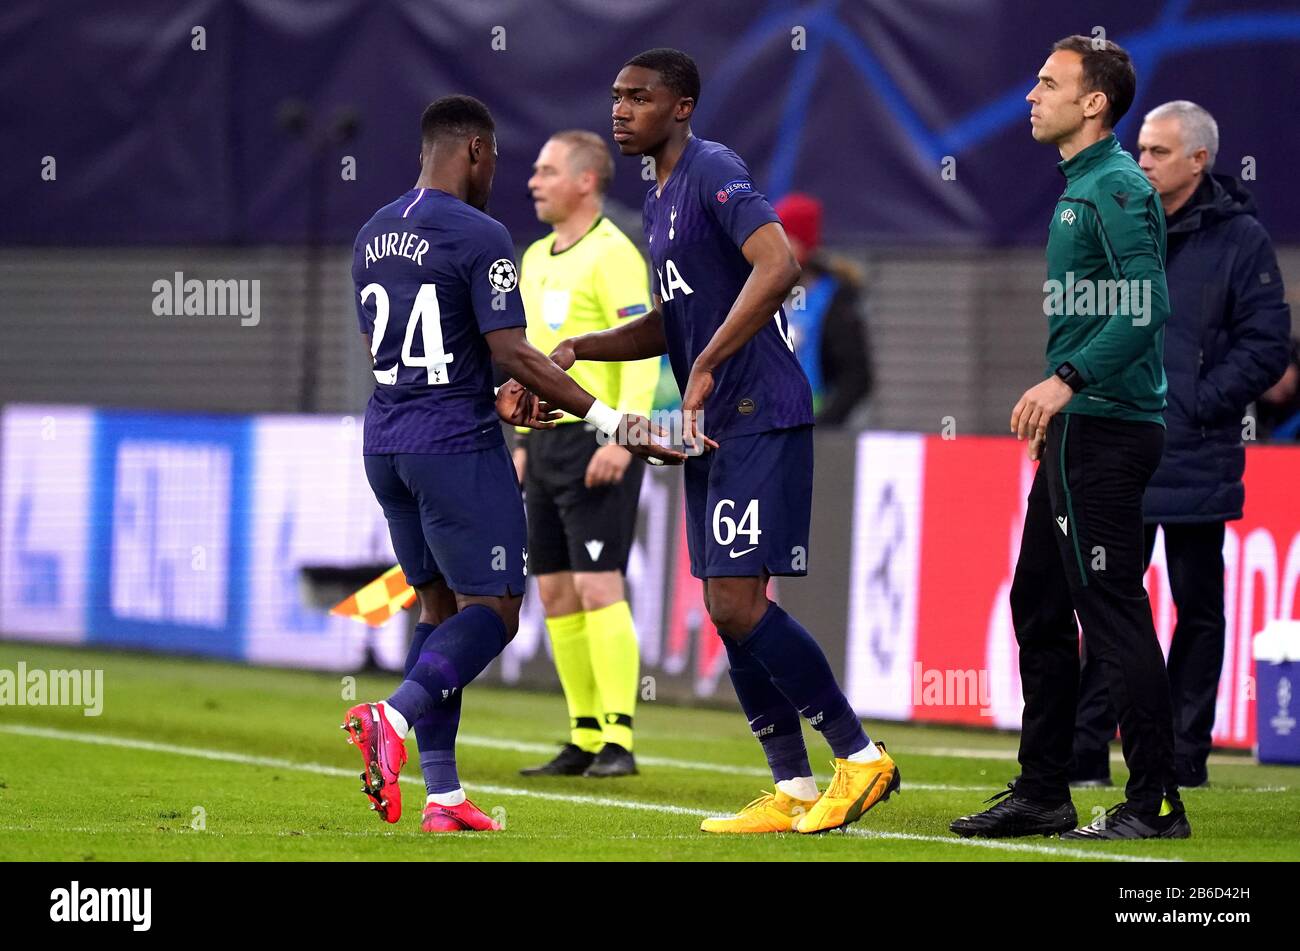 Tottenham Hotspur's Serge Aurier (left) is substituted for Malachi Walcott during the UEFA Champions League round of 16 second leg match at the Red Bull Arena, Leipzig. Stock Photo